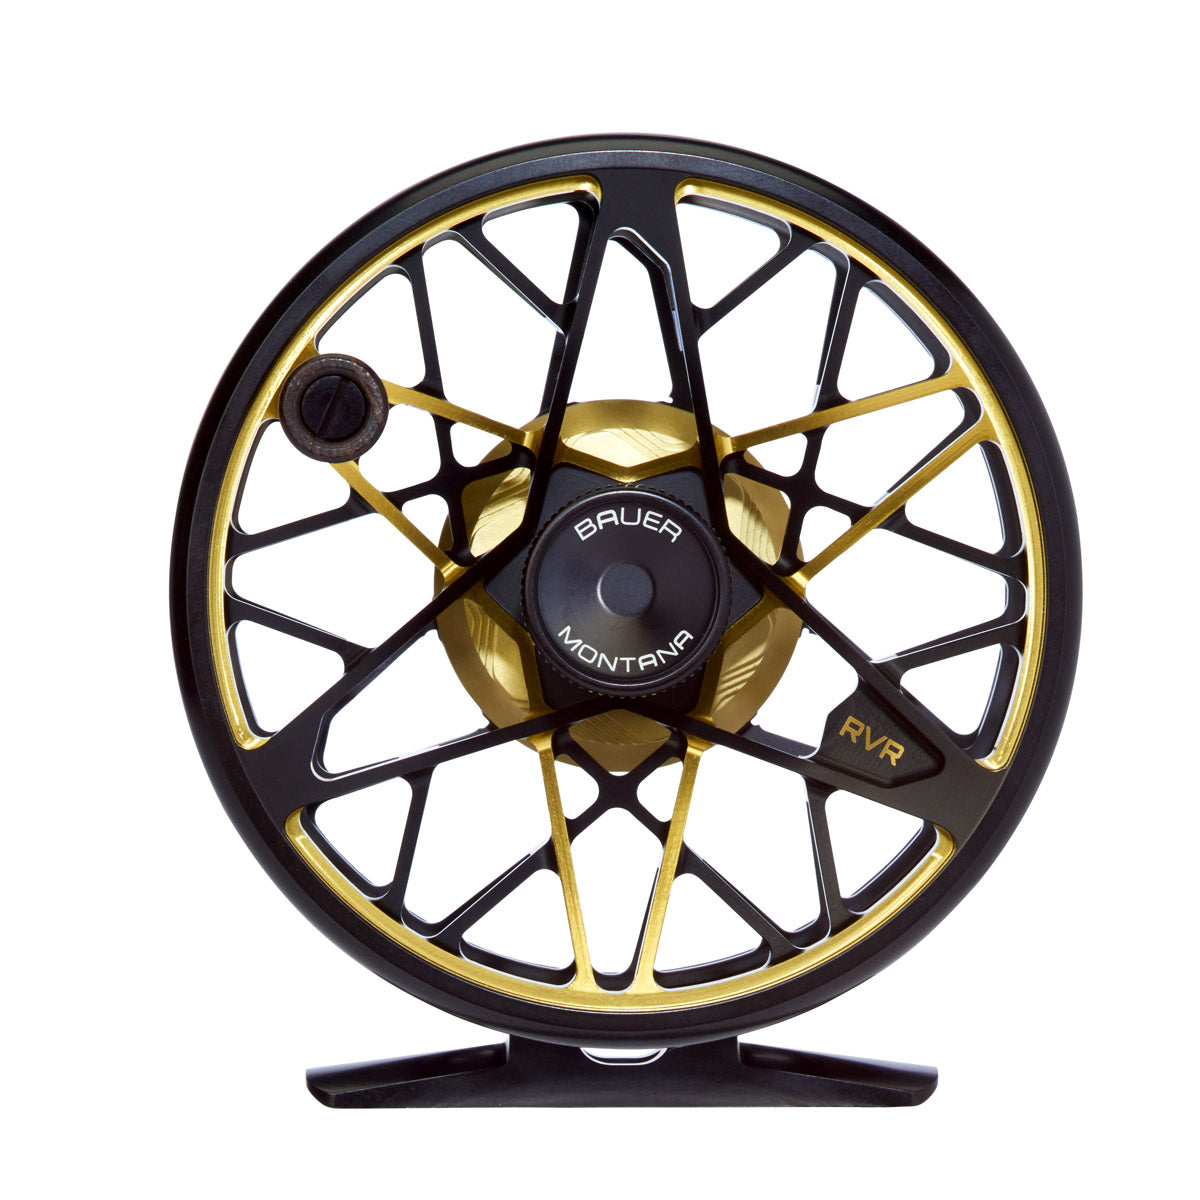 Bauer RVR Fly Fishing Reel Size 6/7 Wt Misc Bauer Fly Fishing – The Gear  Attic